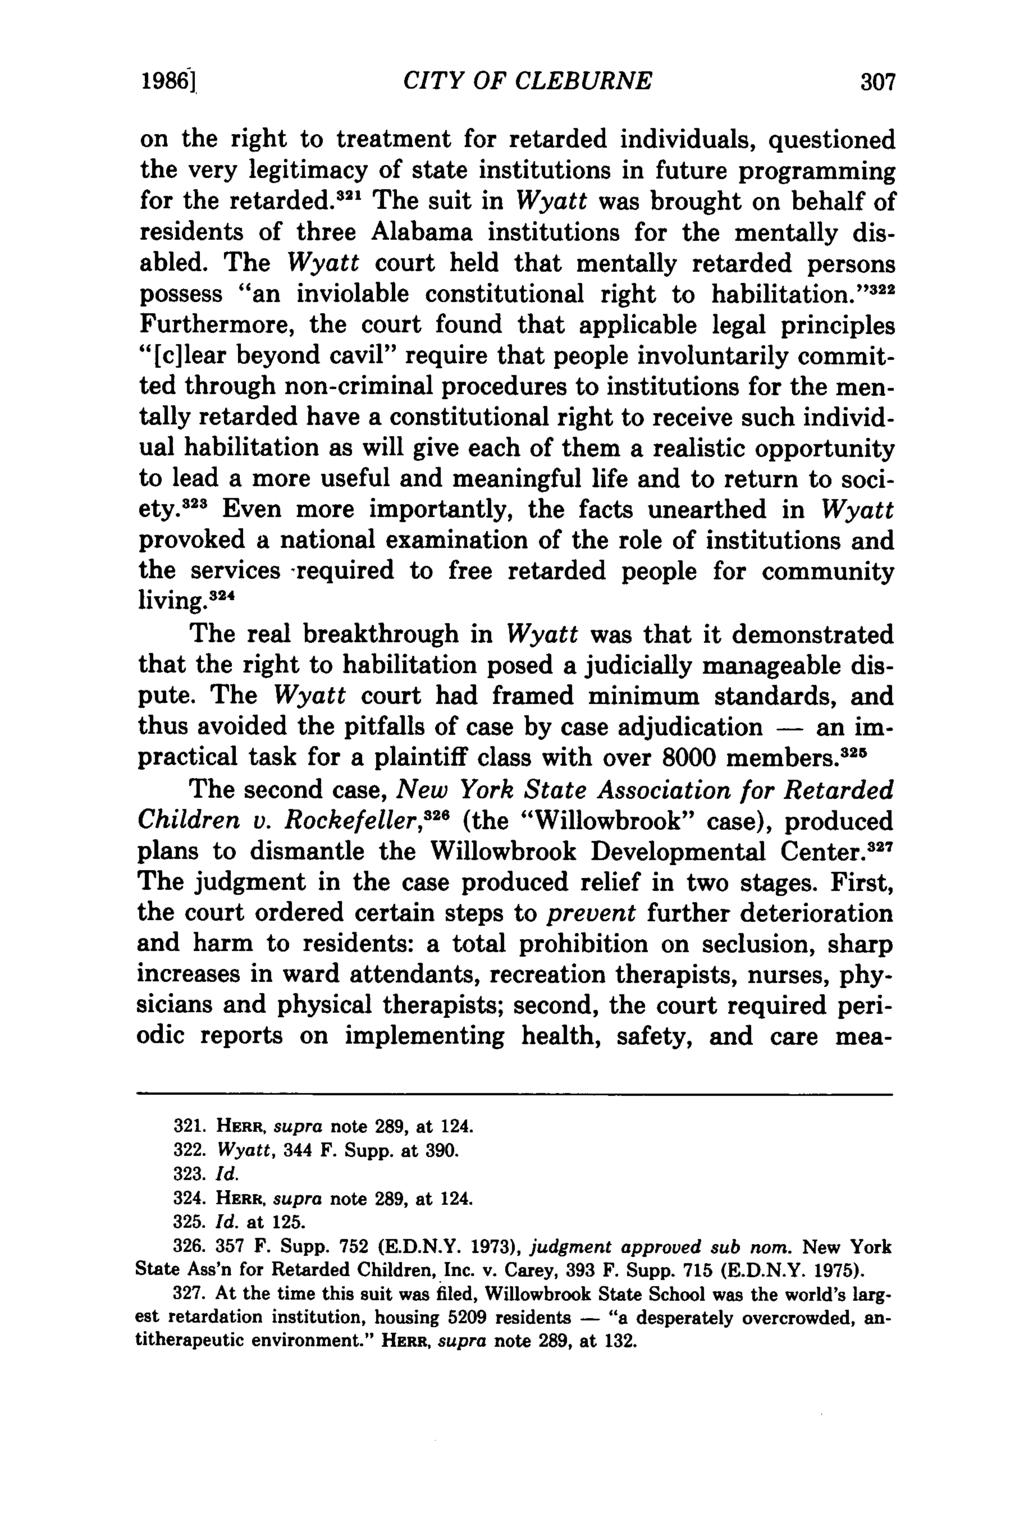 19861 CITY OF CLEBURNE on the right to treatment for retarded individuals, questioned the very legitimacy of state institutions in future programming for the retarded.